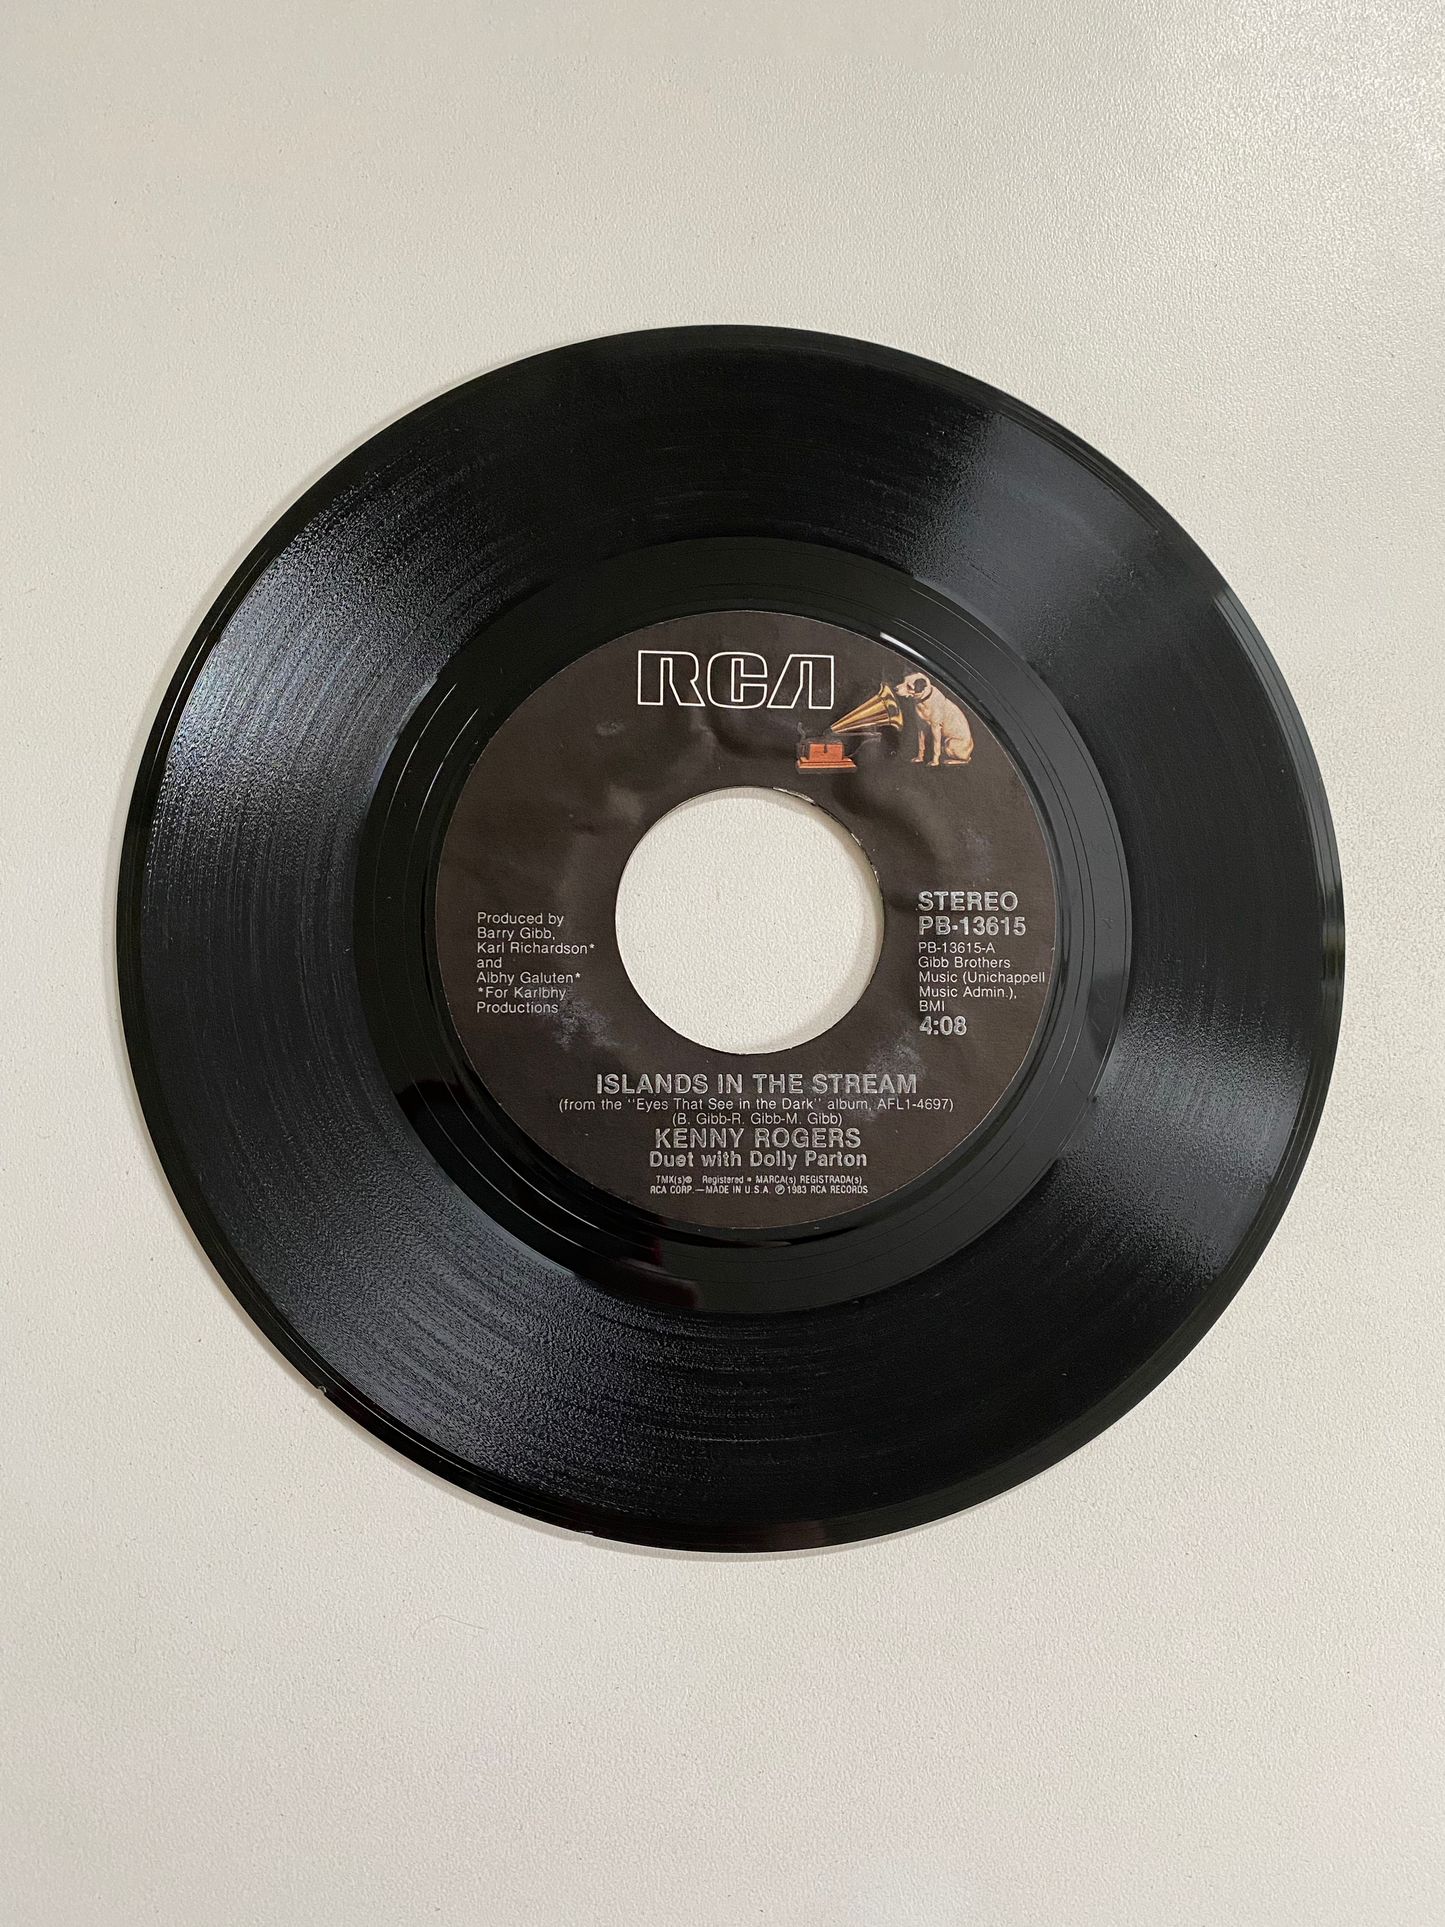 Kenny Rogers and Dolly Parton - Islands in the Stream | 45 The Vintedge Co.